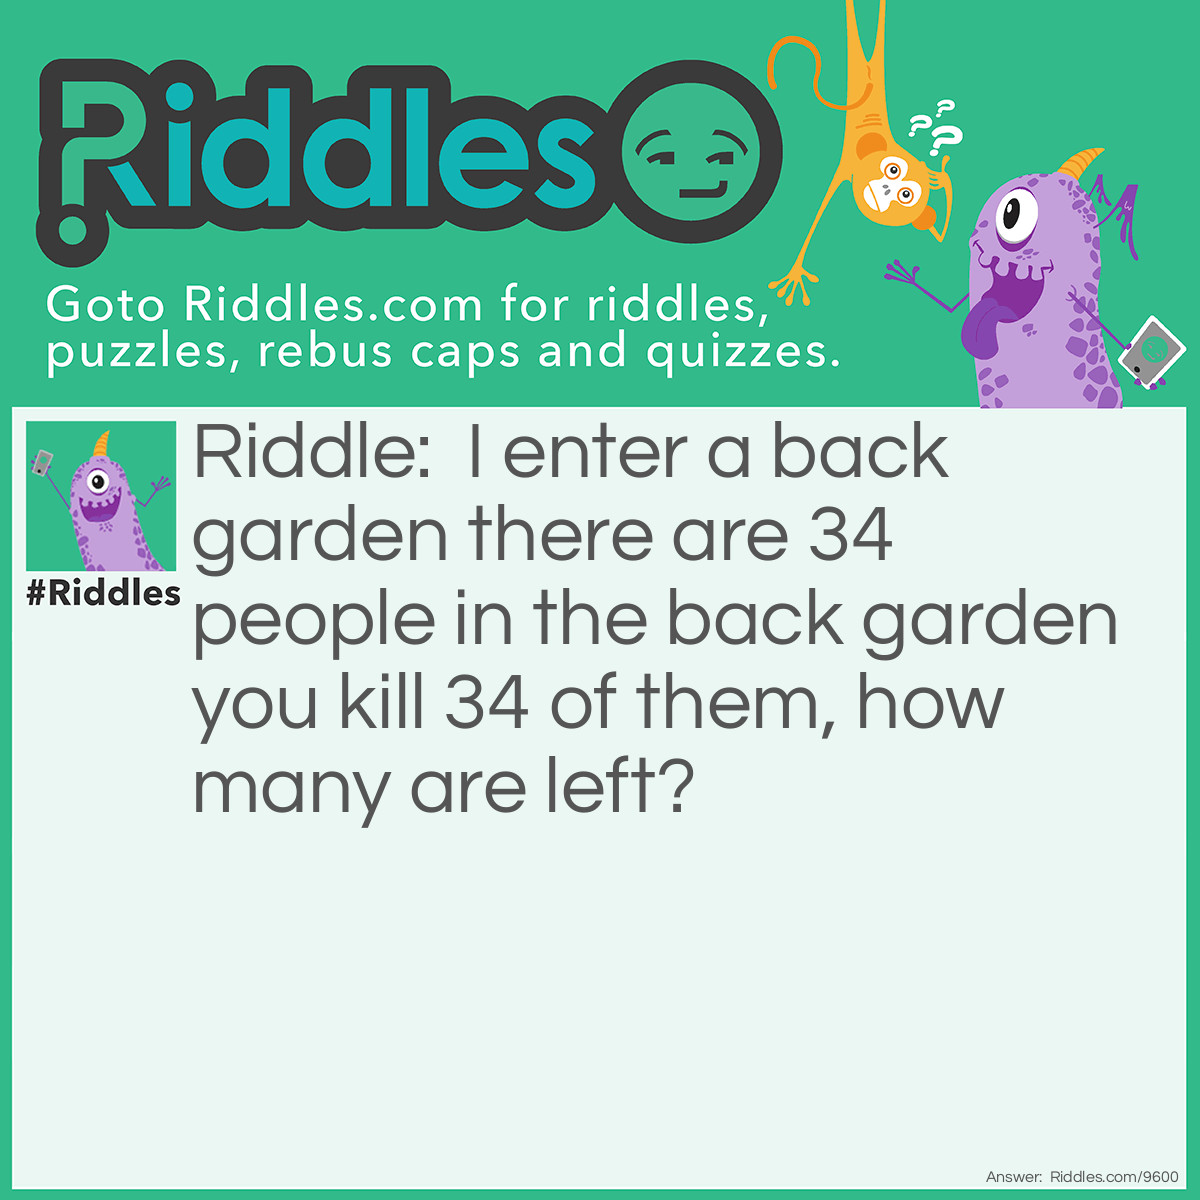 Riddle: I enter a back garden there are 34 people in the back garden you kill 34 of them, how many are left? Answer: 35 Including you because you never moved the bodies.